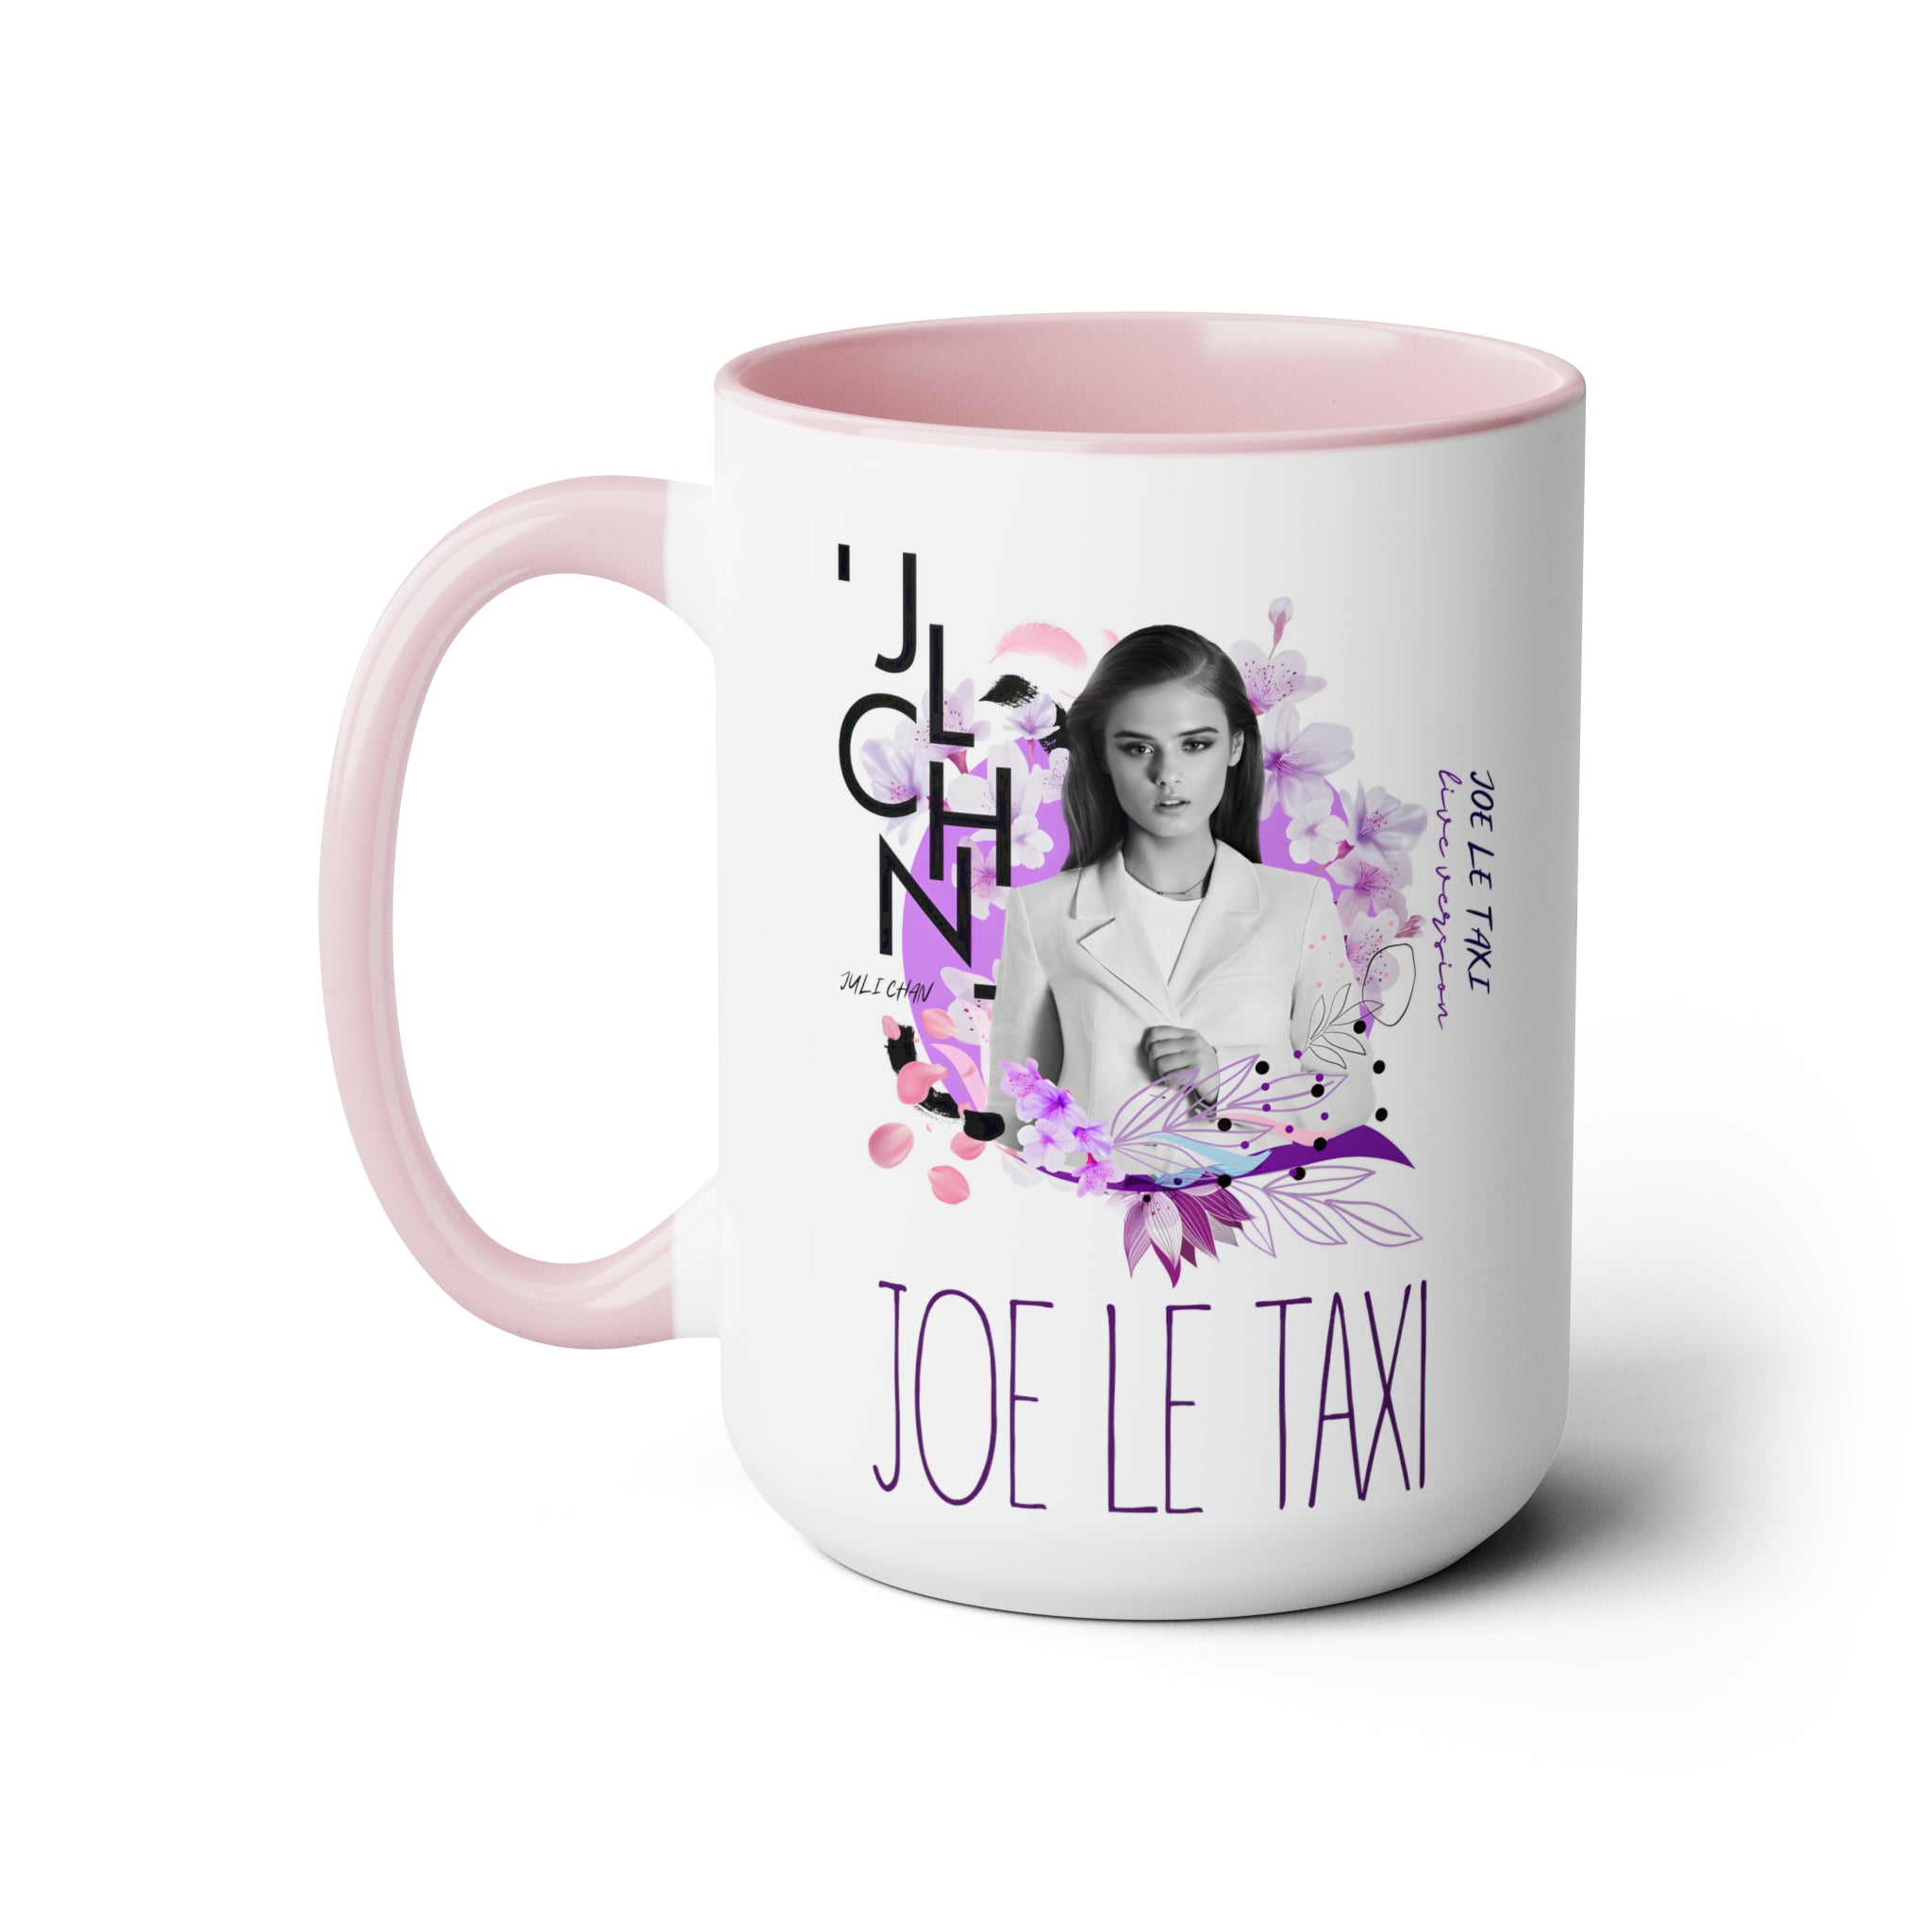 Captivating Cover Arts from 'The Posh Tour' Live Versions - Juli Chan's Two Tone Big Coffee Mugs, 450 ml